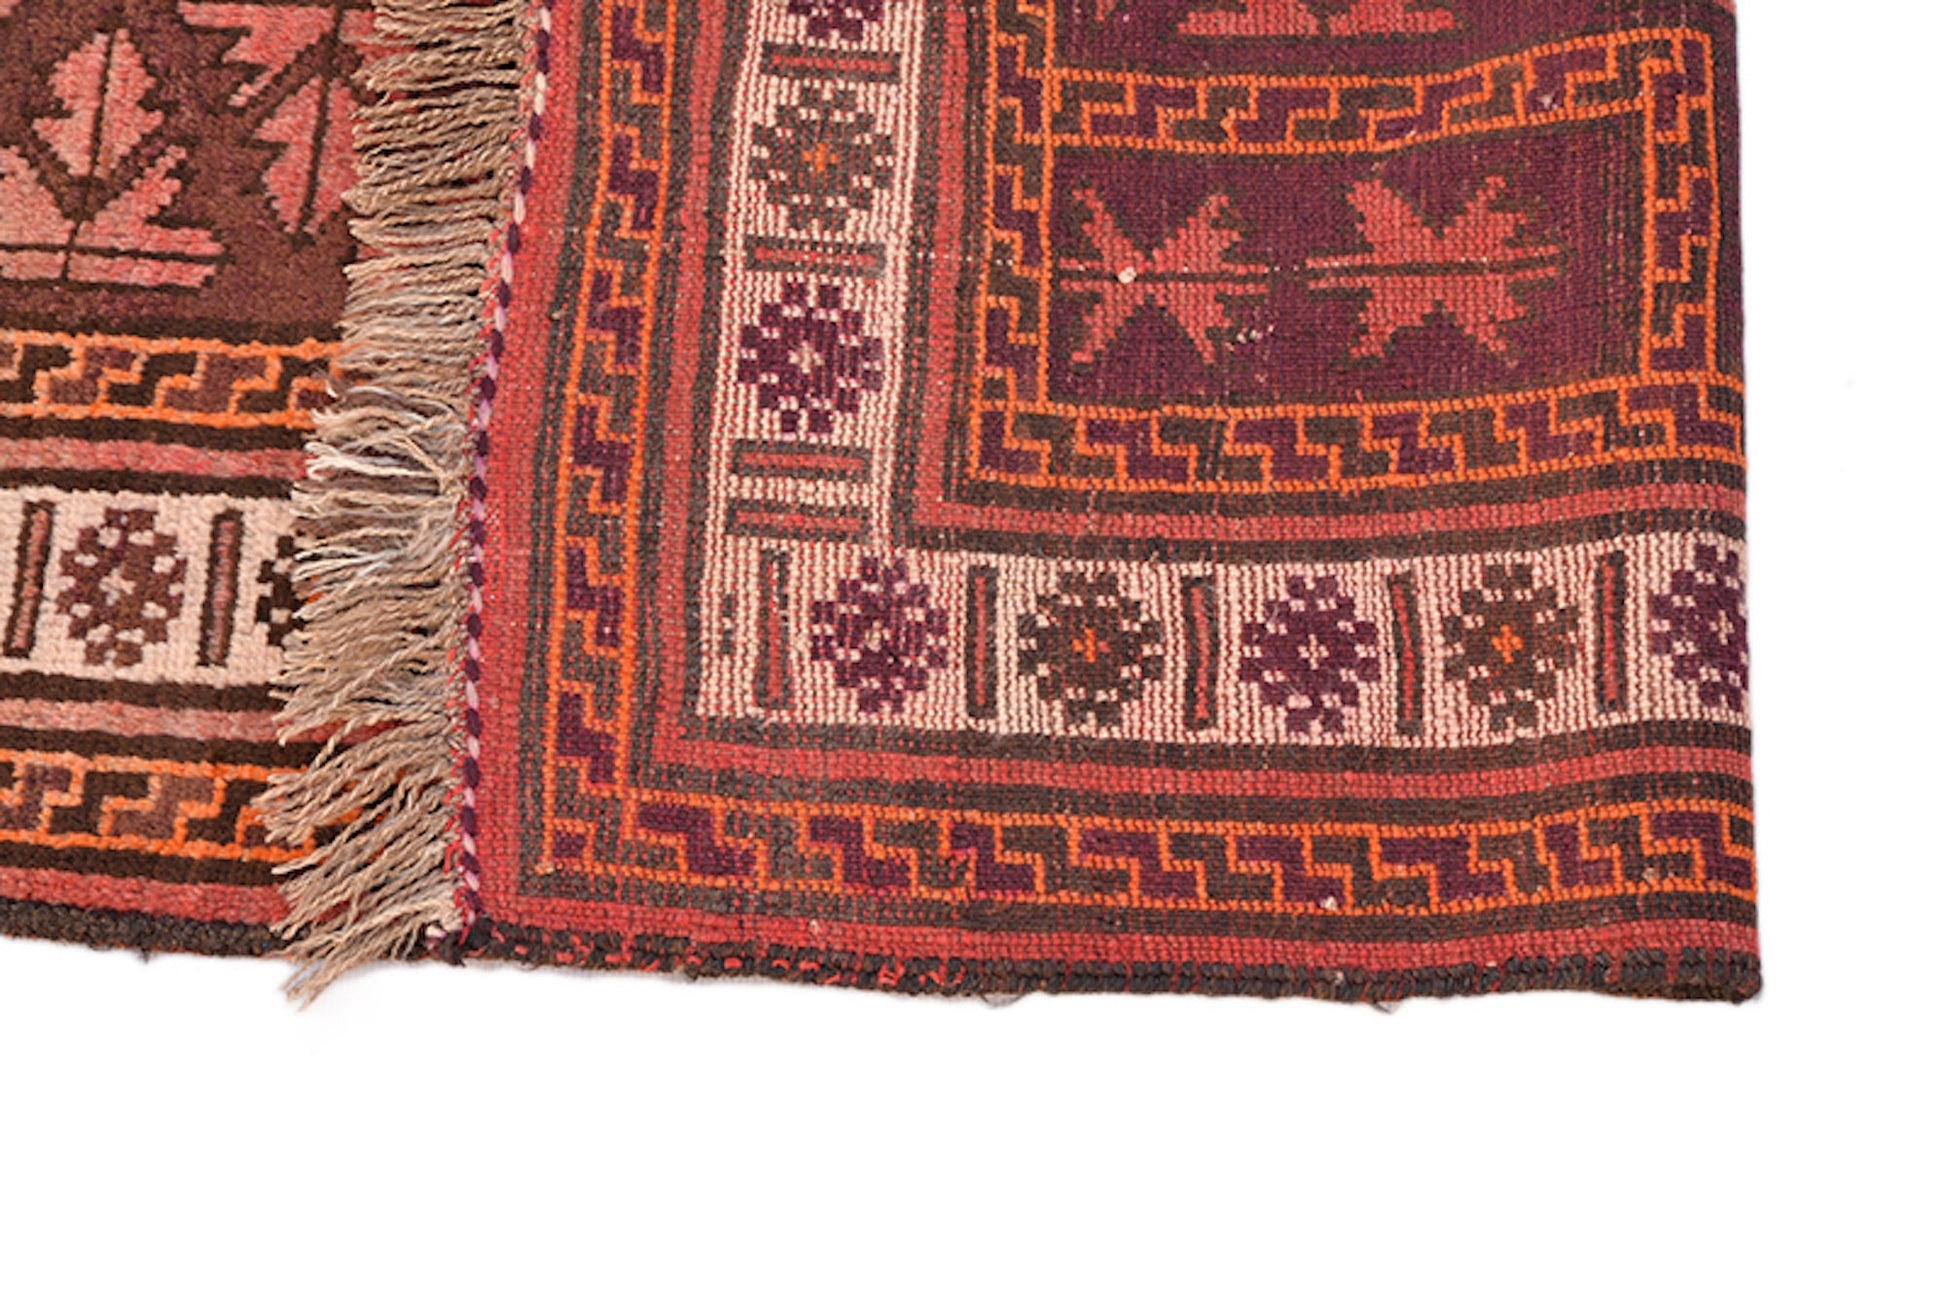 3x4 Small Hand Woven Area Rug | Vintage Coral Orange Brown Wool Rug